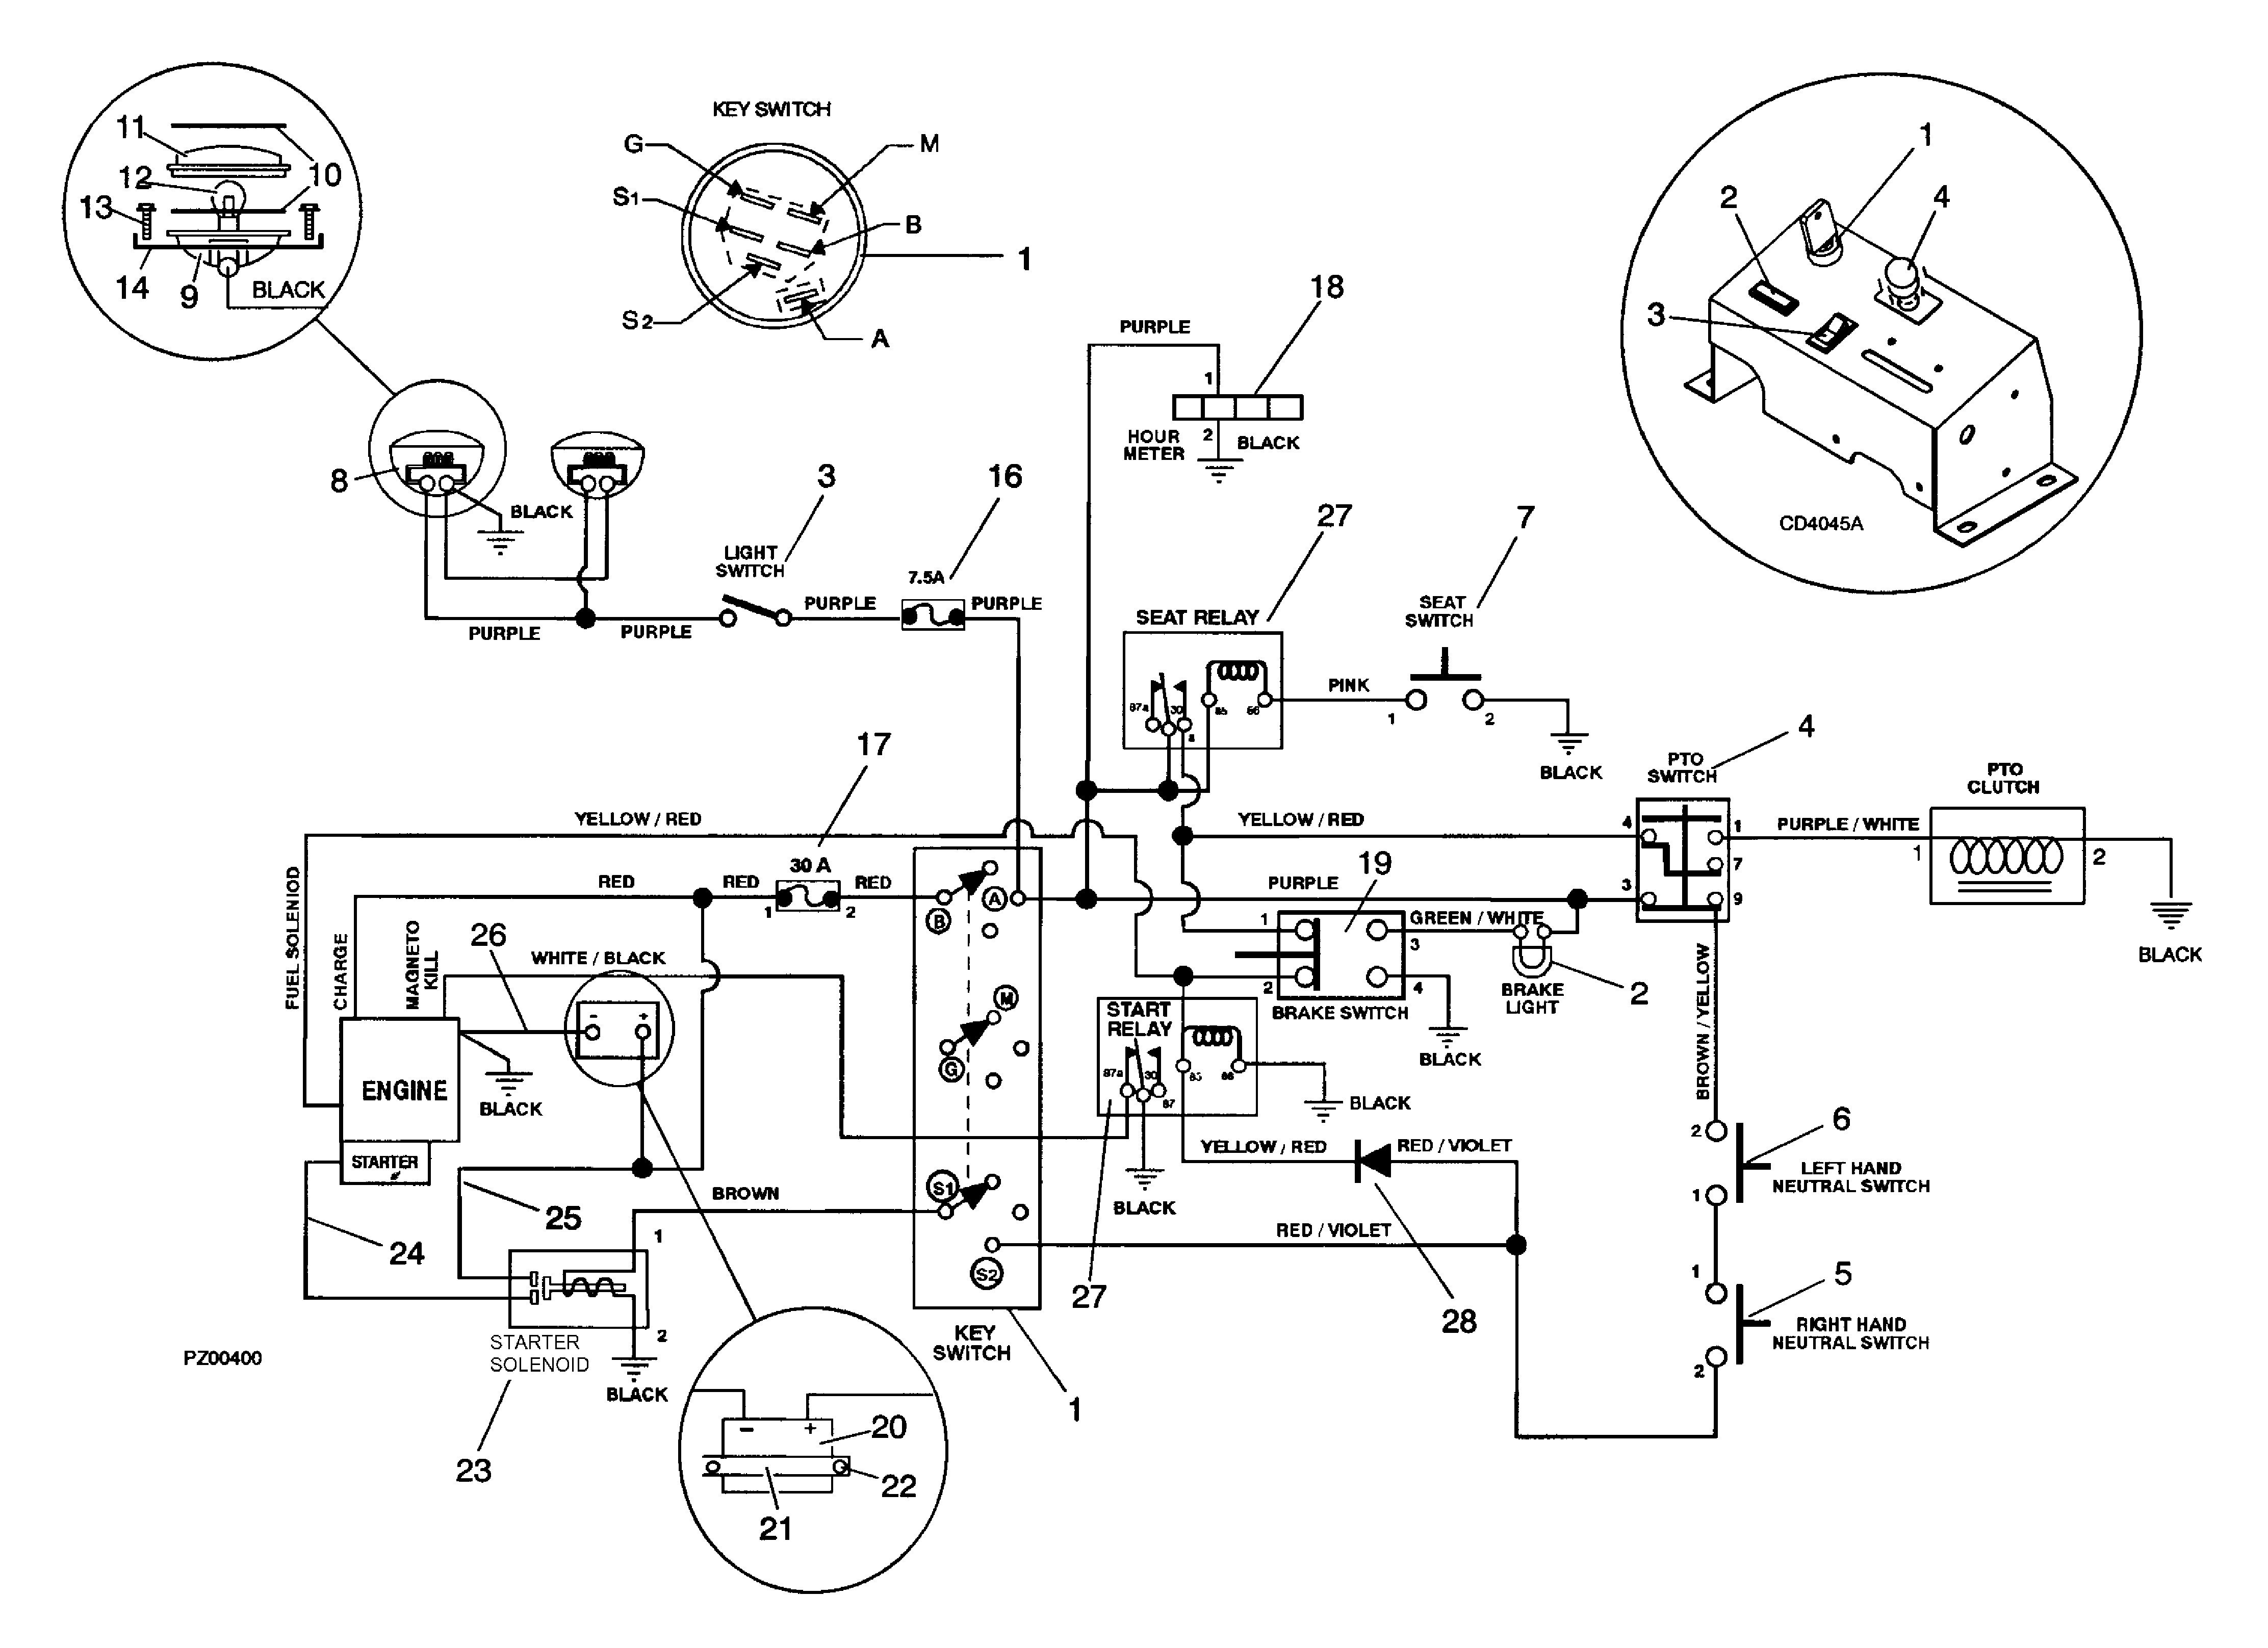 Briggs &amp;stratton 17.5 Hp Part Diaghram 20 Hp Briggs and Stratton Wiring Diagram Free Download Of Briggs &amp;stratton 17.5 Hp Part Diaghram